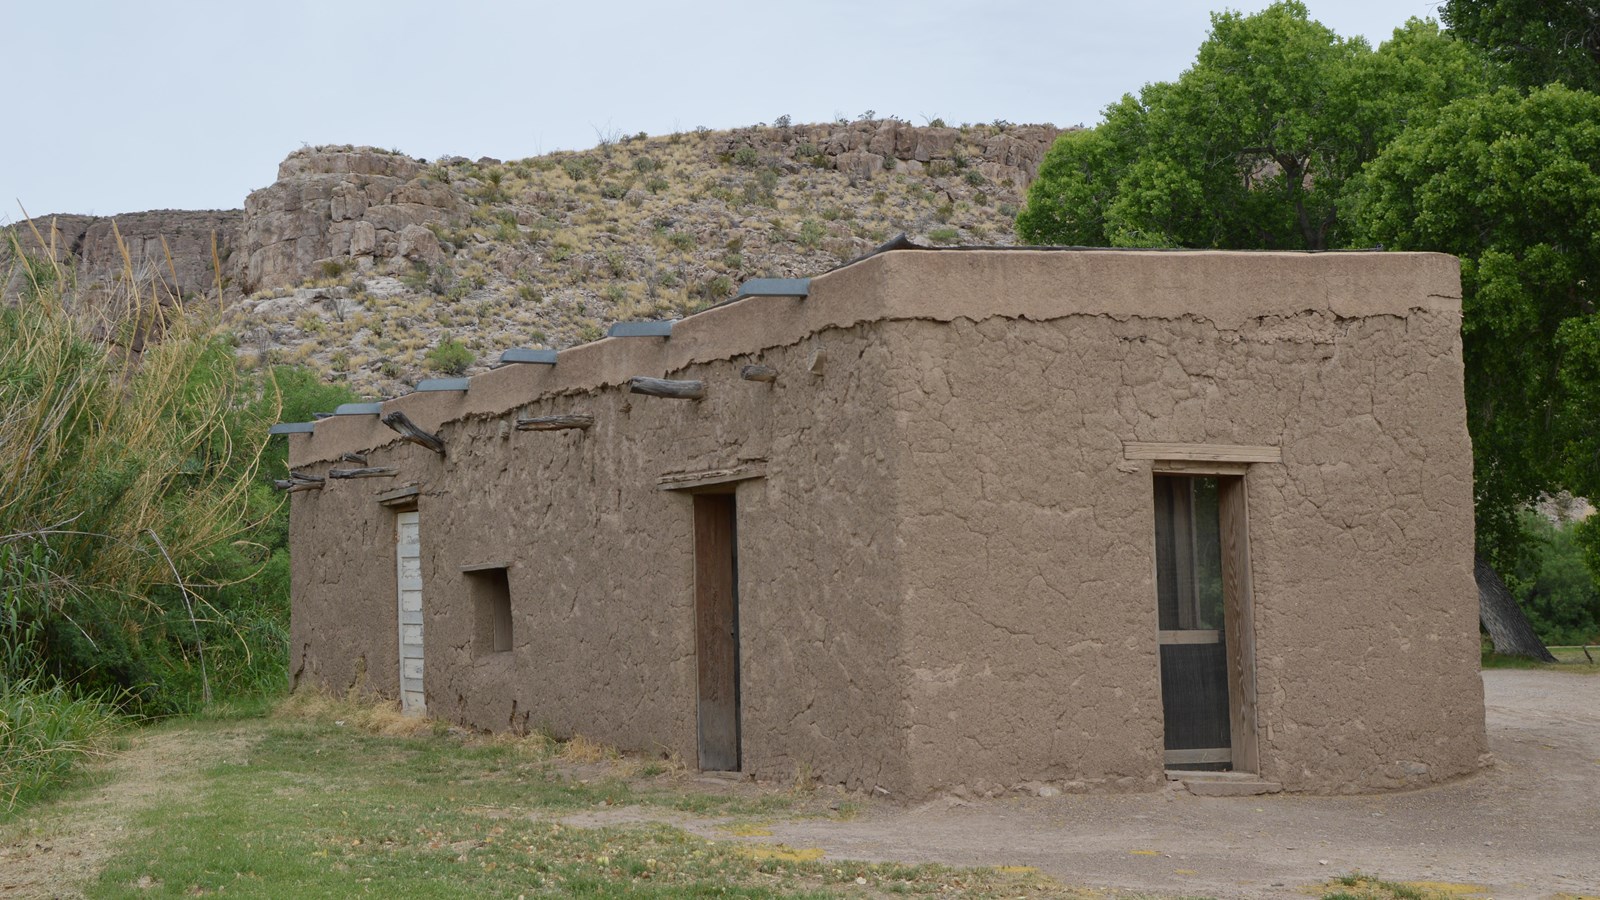 An small adobe building sits in a flat near cottonwood trees and limestone cliffs.